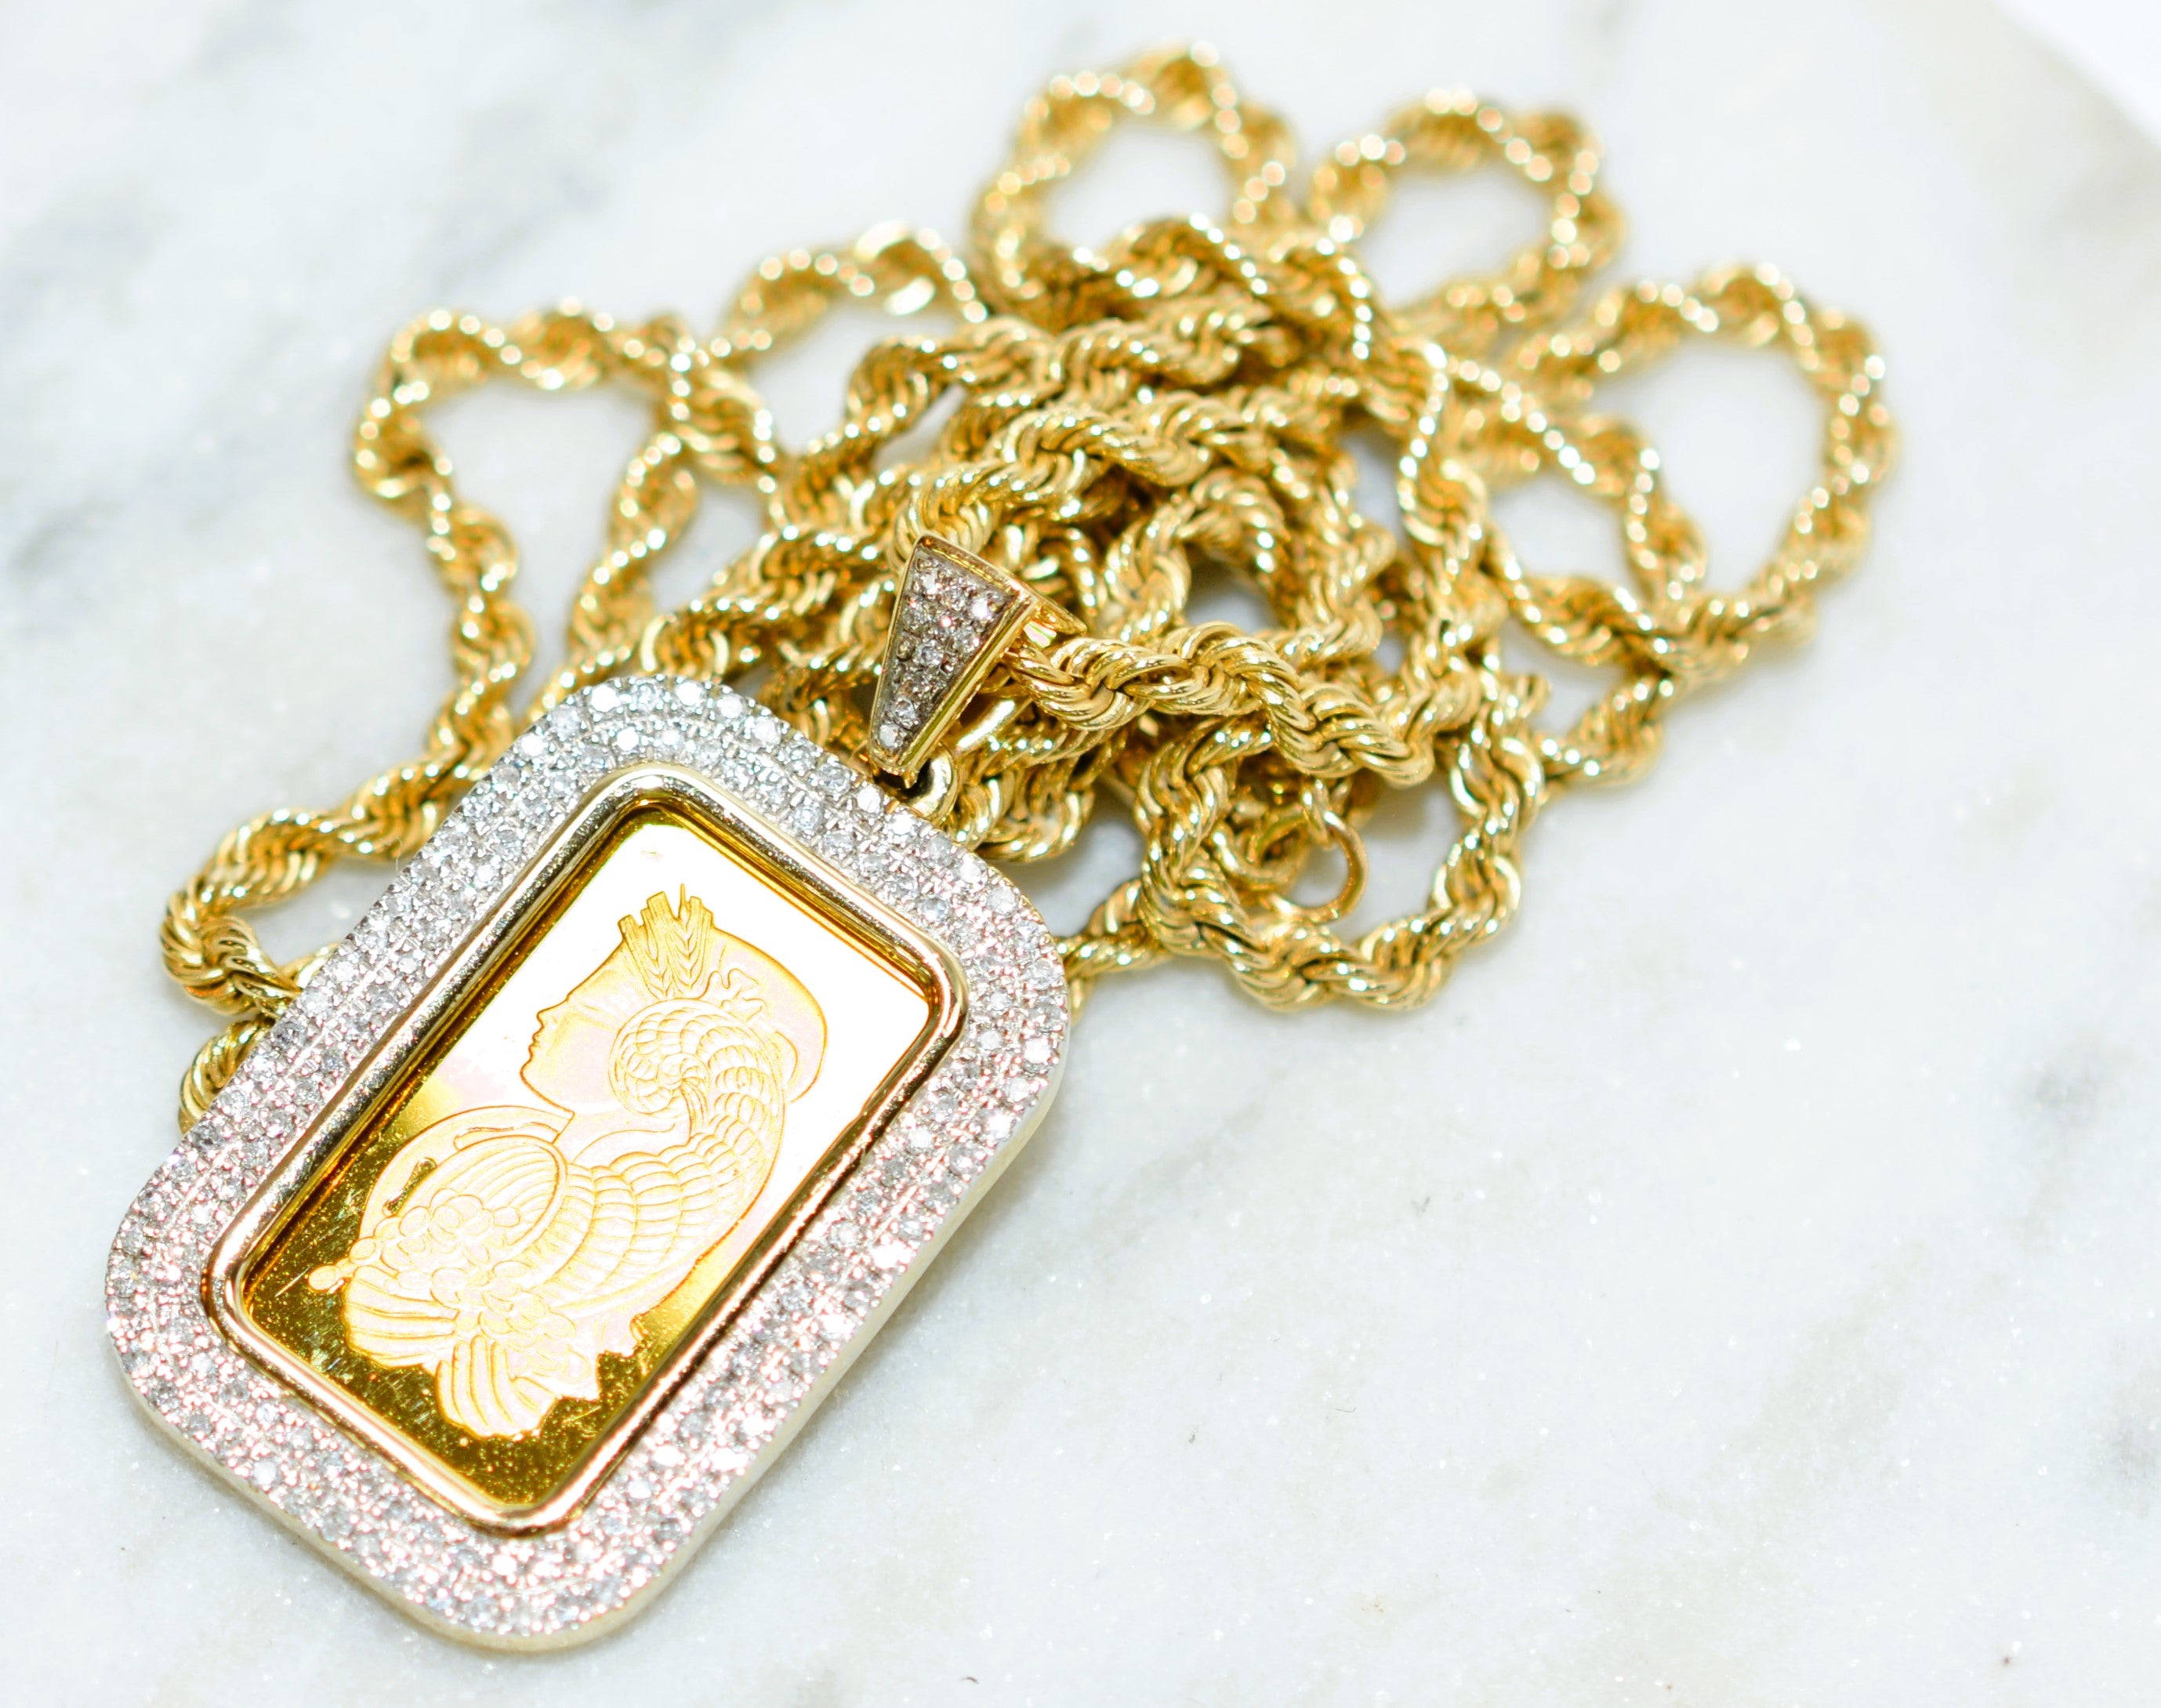 Lady Fortuna Pamp Suisse 2.5g Gold Bar Coin Necklace 14K Solid Gold .31tcw Diamond Necklace Bullion Coin Ingot Pendant Necklace Jewellery